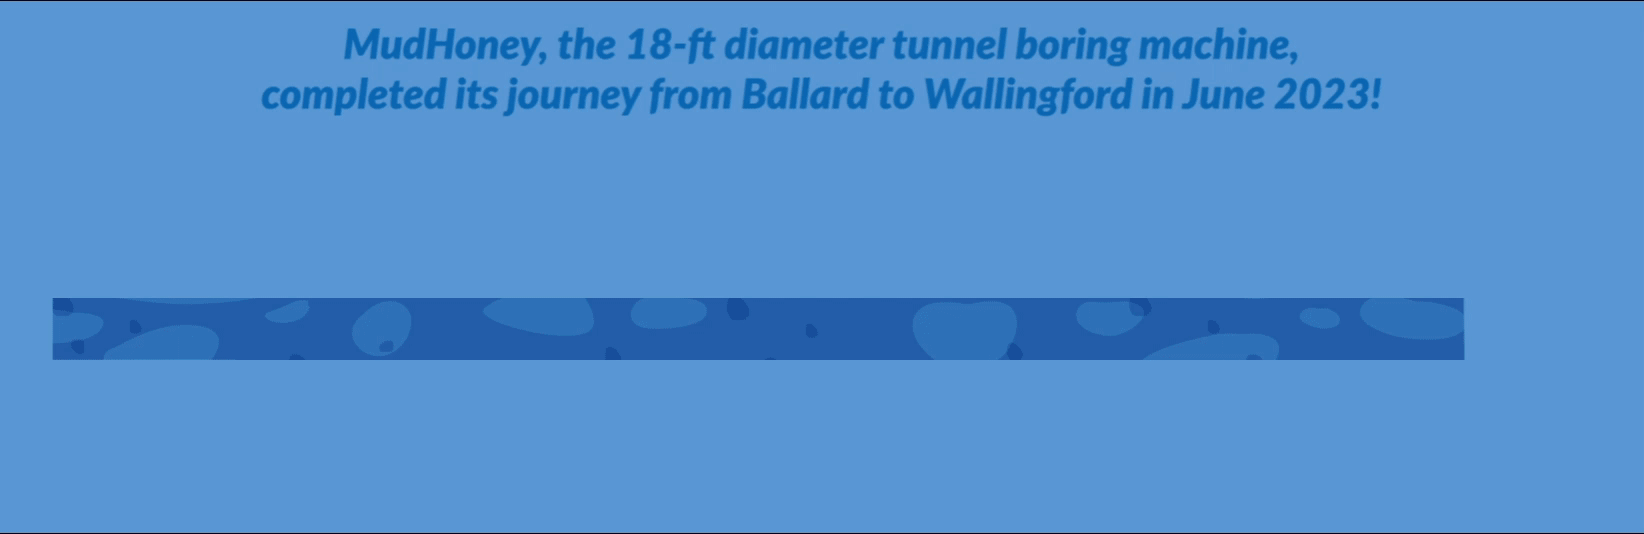 Animation with text: MudHoney, the 18-ft diameter tunnel boring machine, completed its journey from Ballard to Wallingford in June 2023!